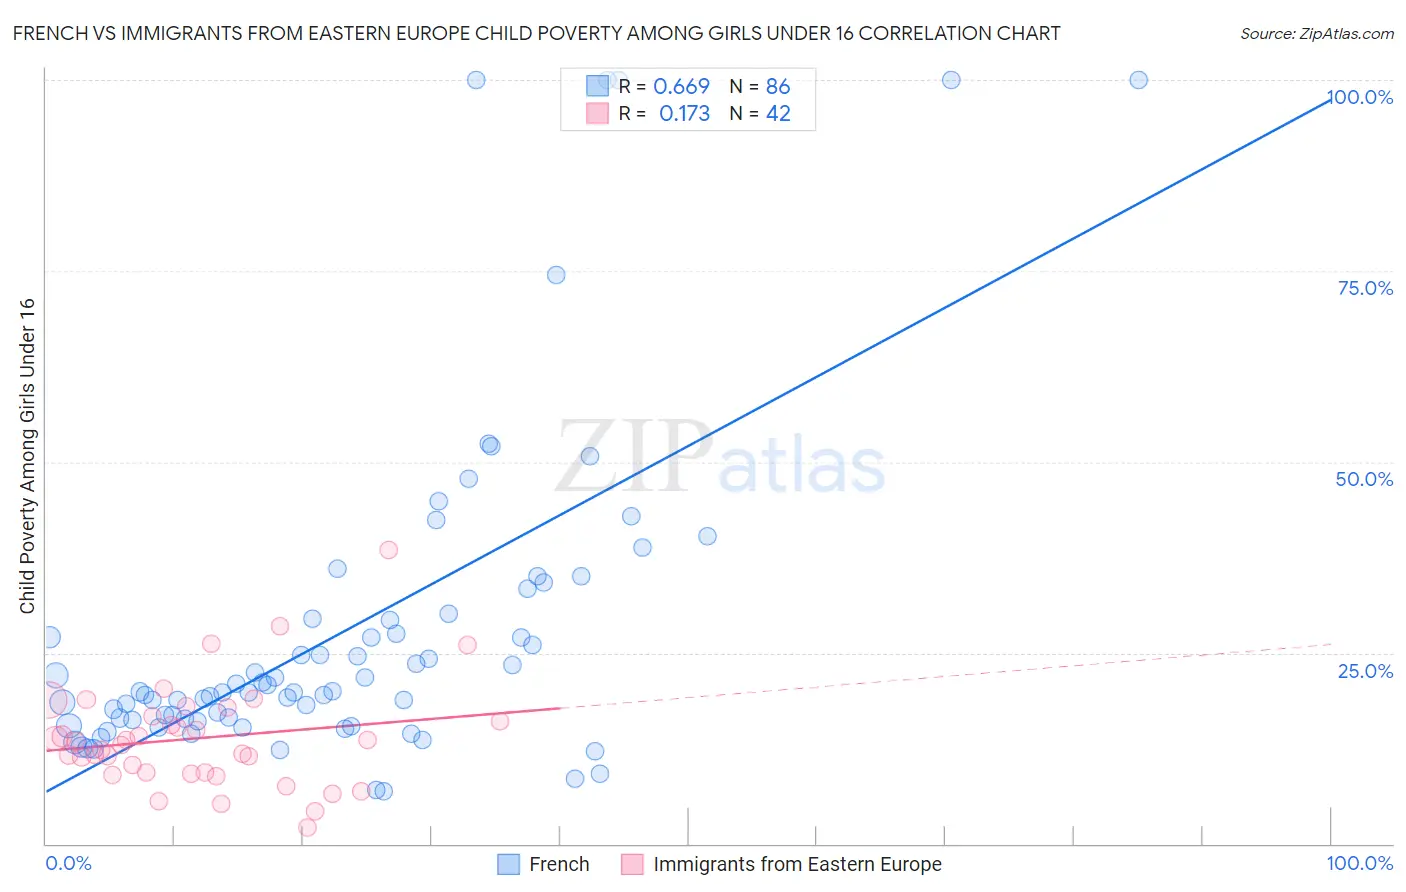 French vs Immigrants from Eastern Europe Child Poverty Among Girls Under 16